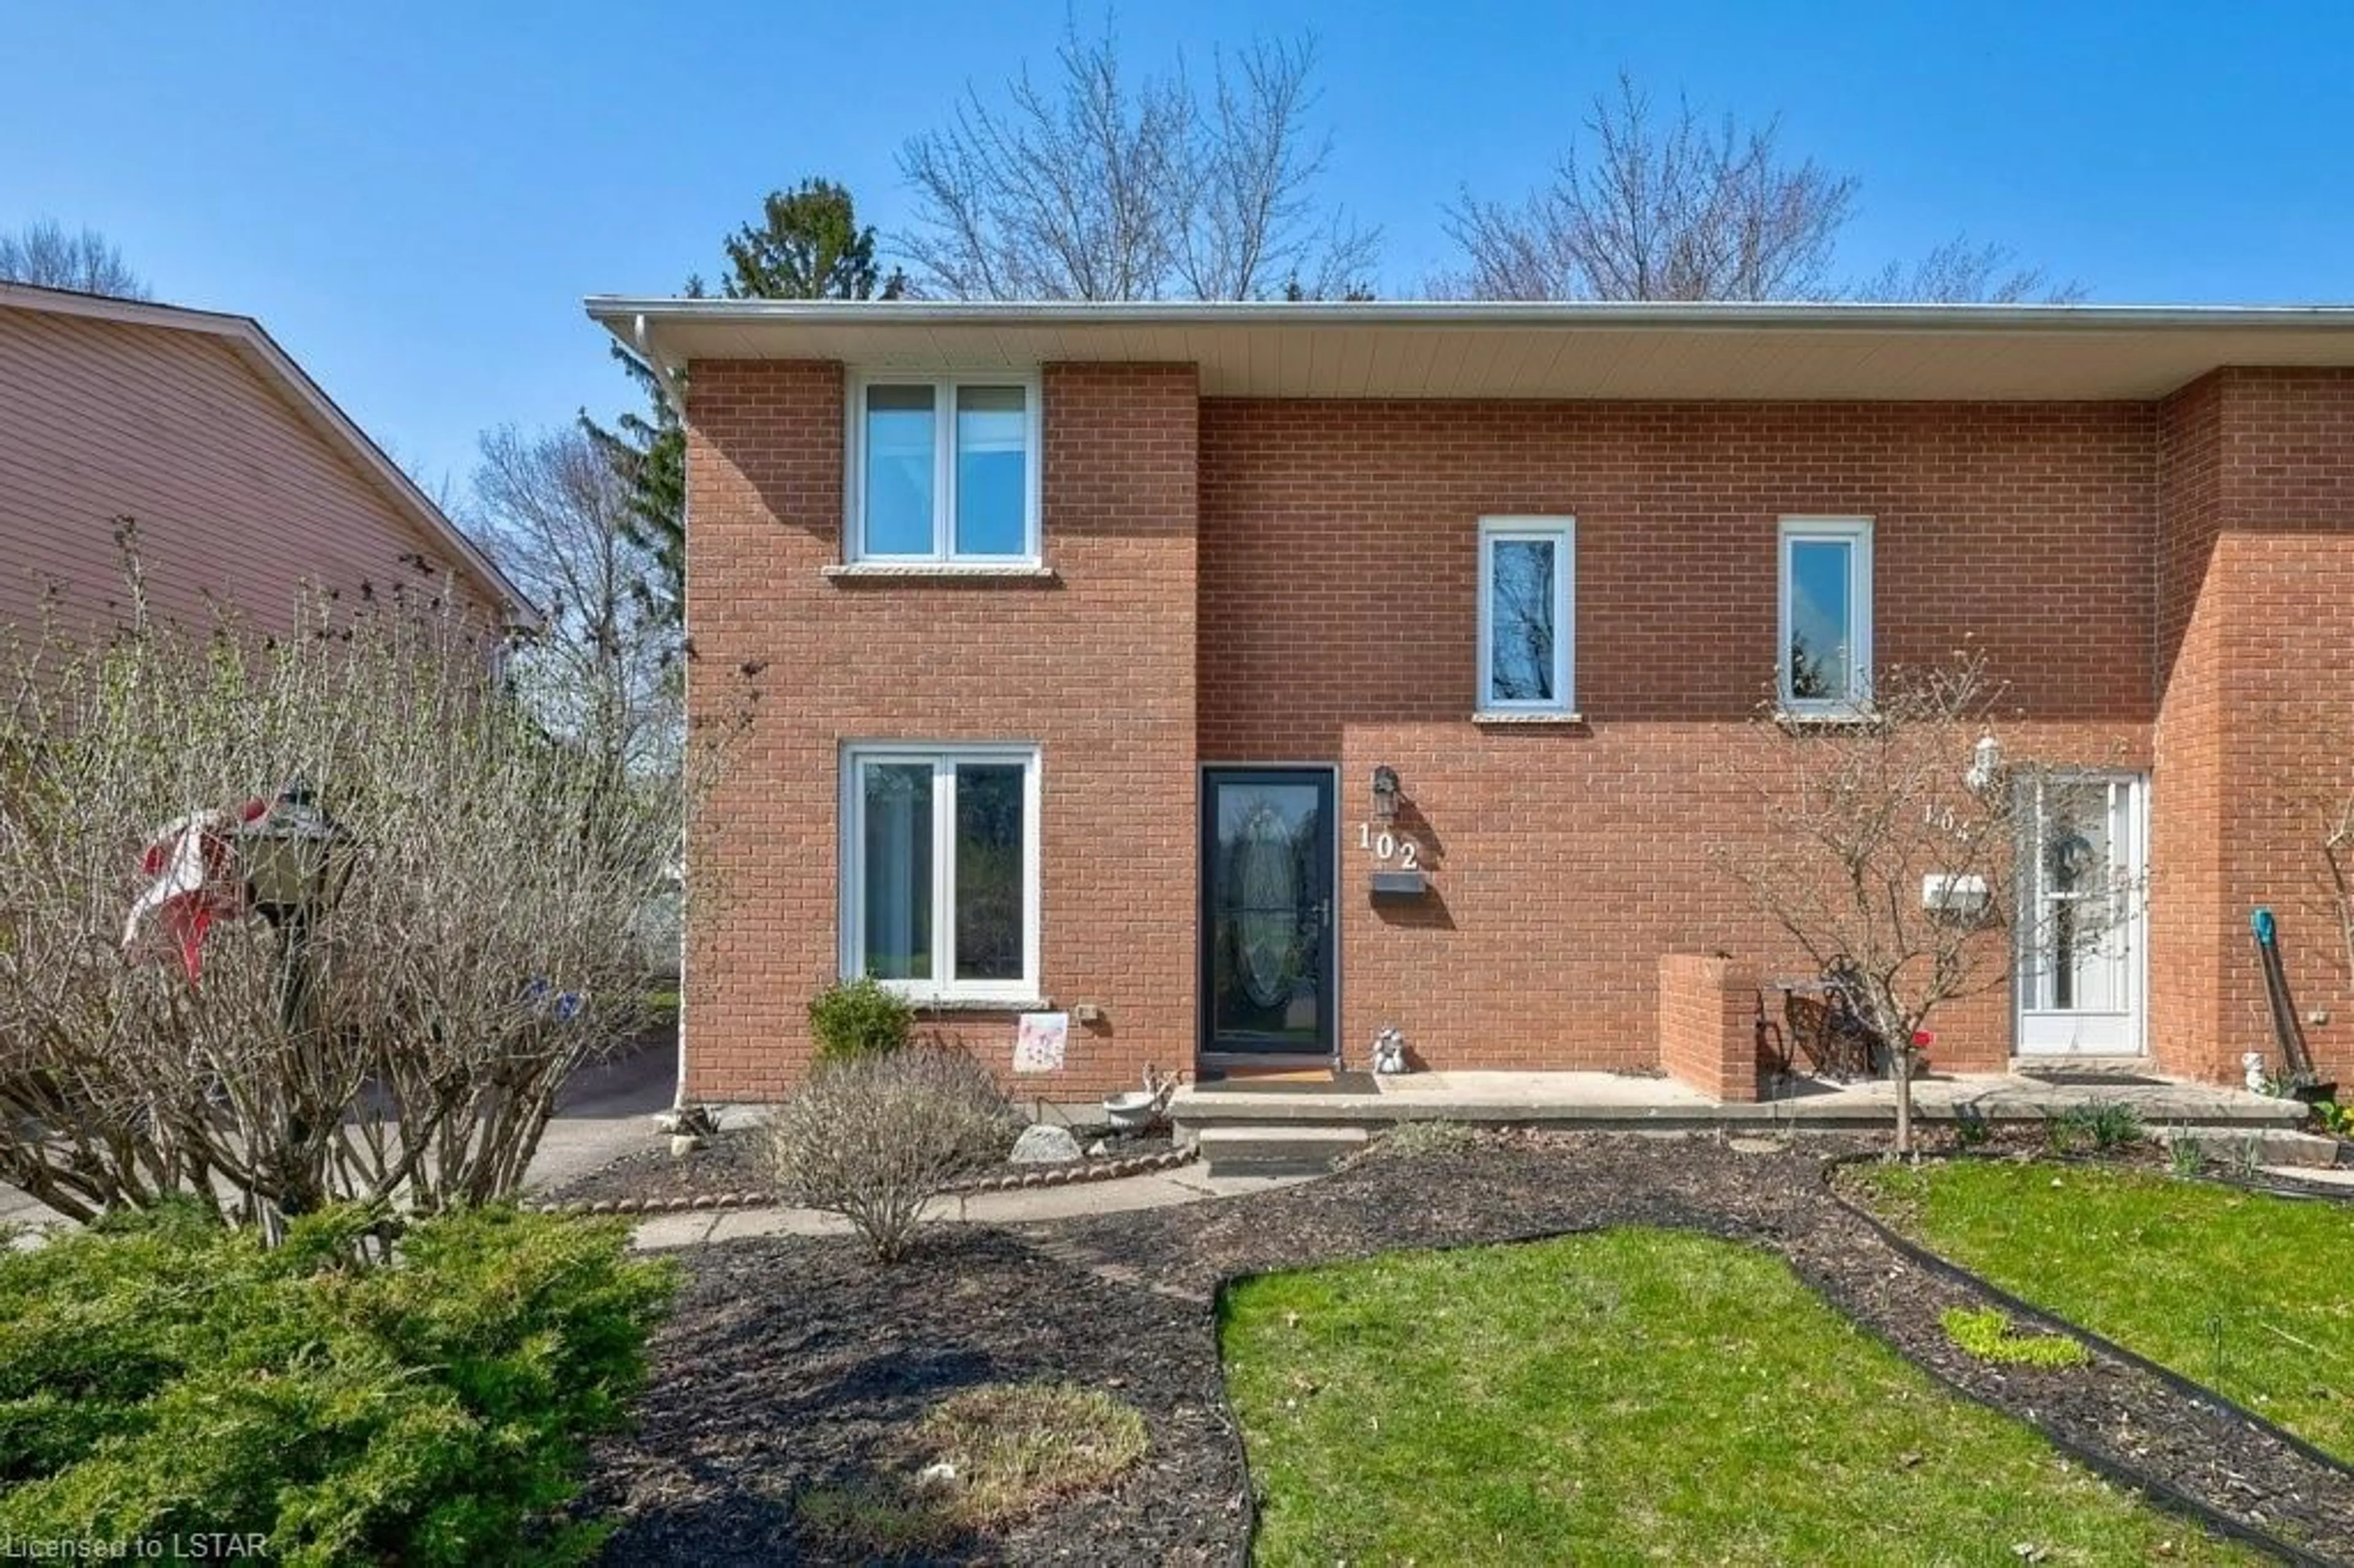 Home with brick exterior material for 102 Killarney Crt, London Ontario N5X 2B6